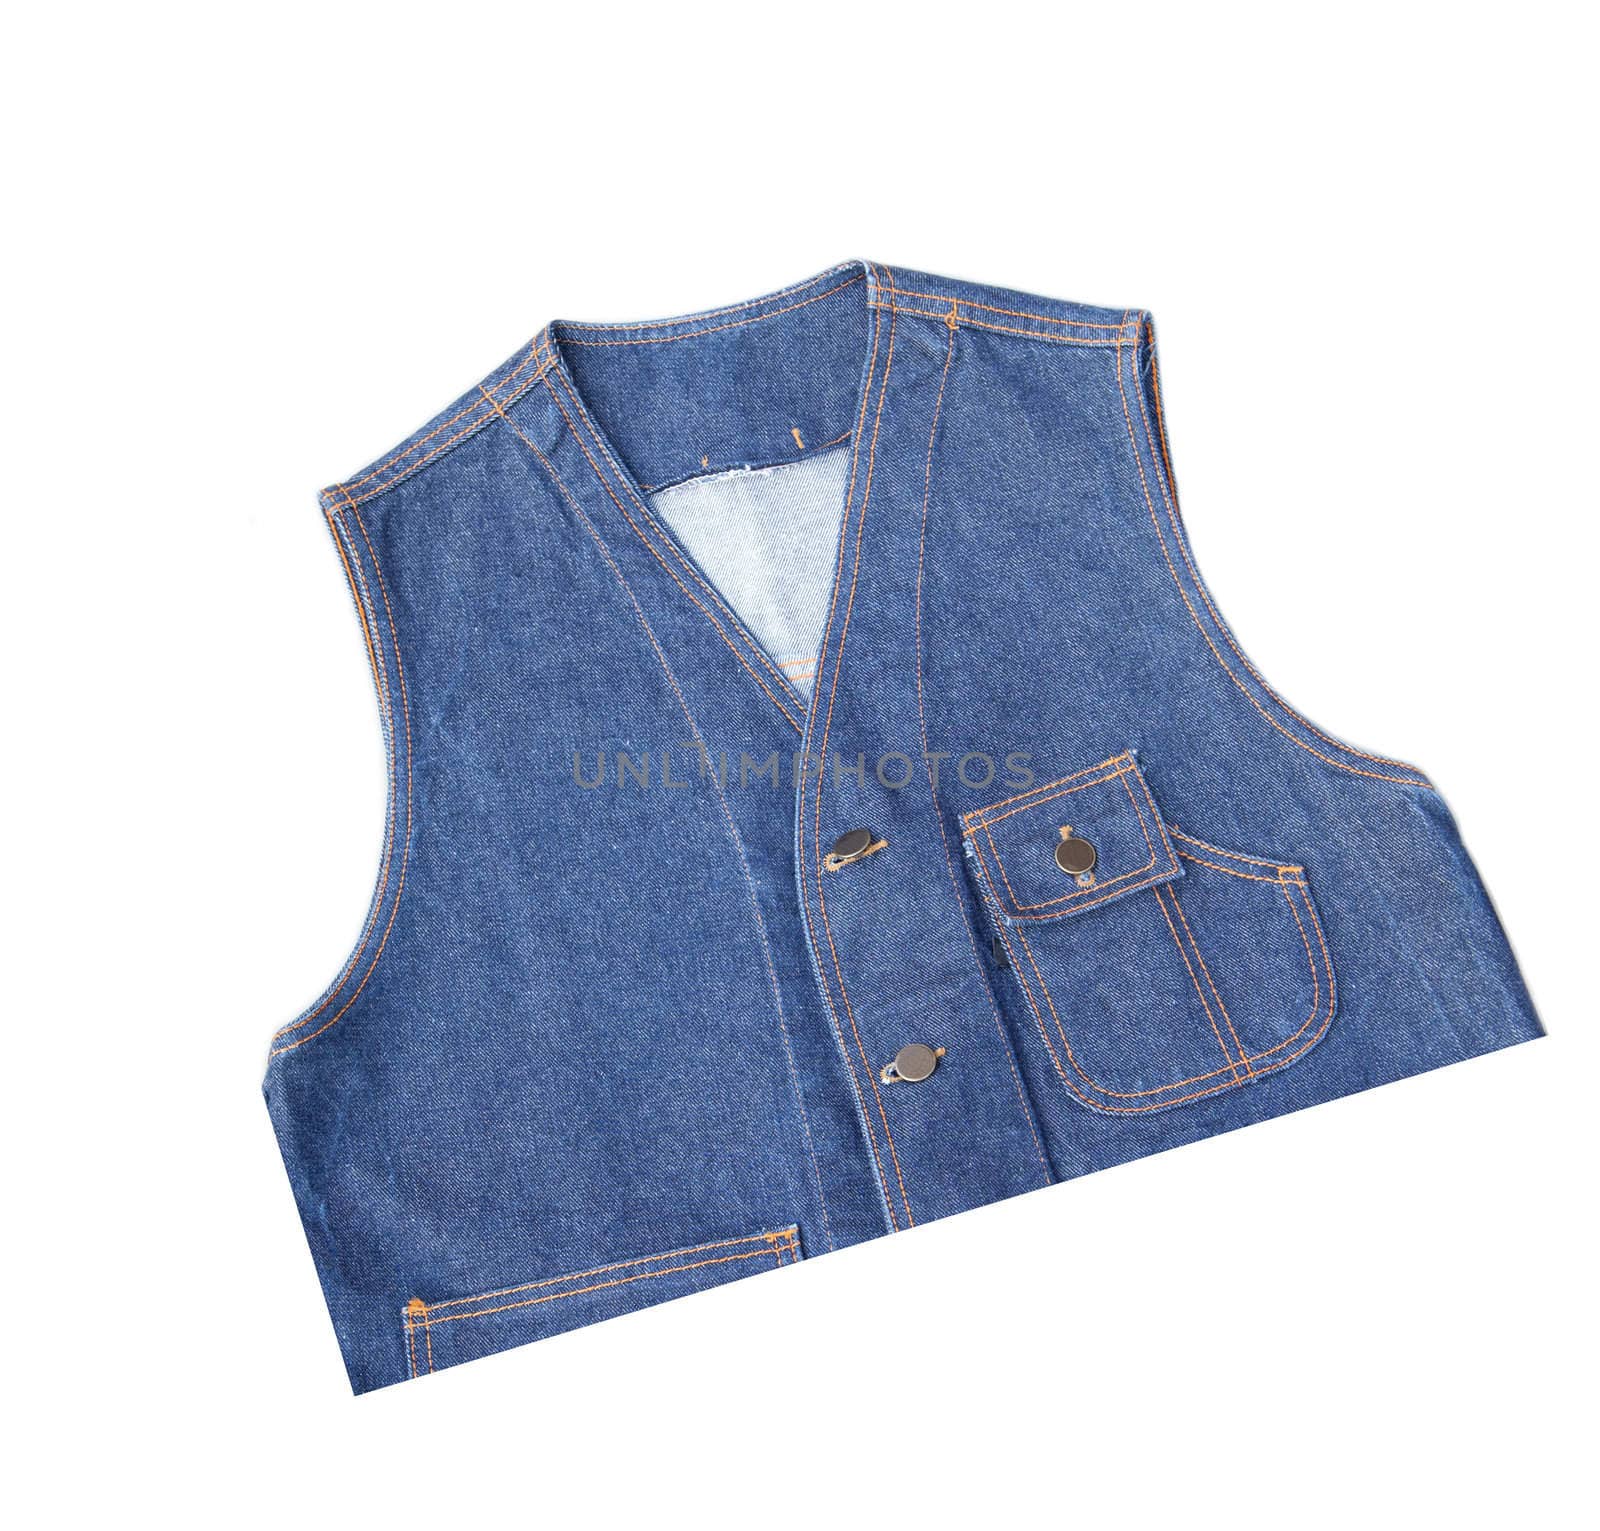 Bluejeans vest cut at a half on white isolated background.